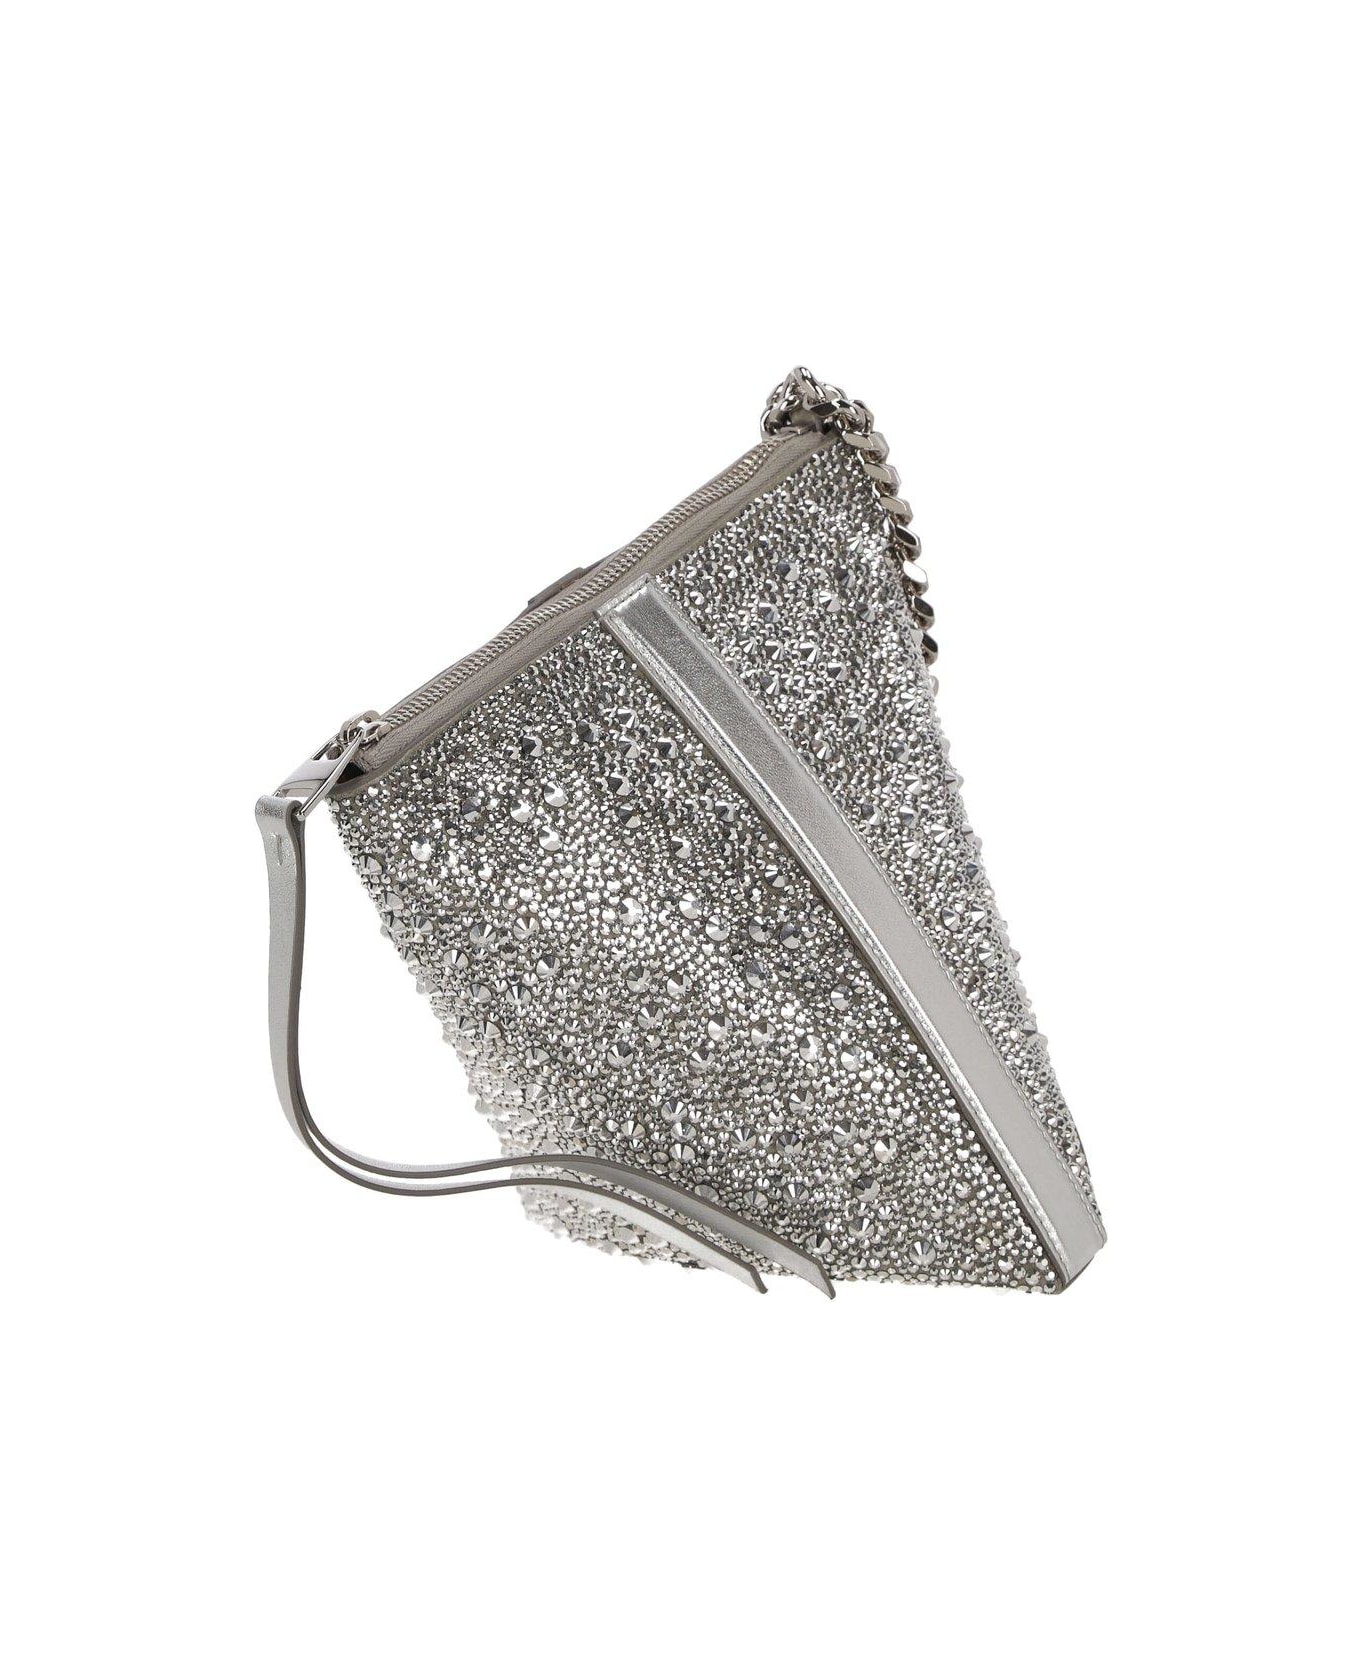 Alexander McQueen The Curve Embellished Pouch